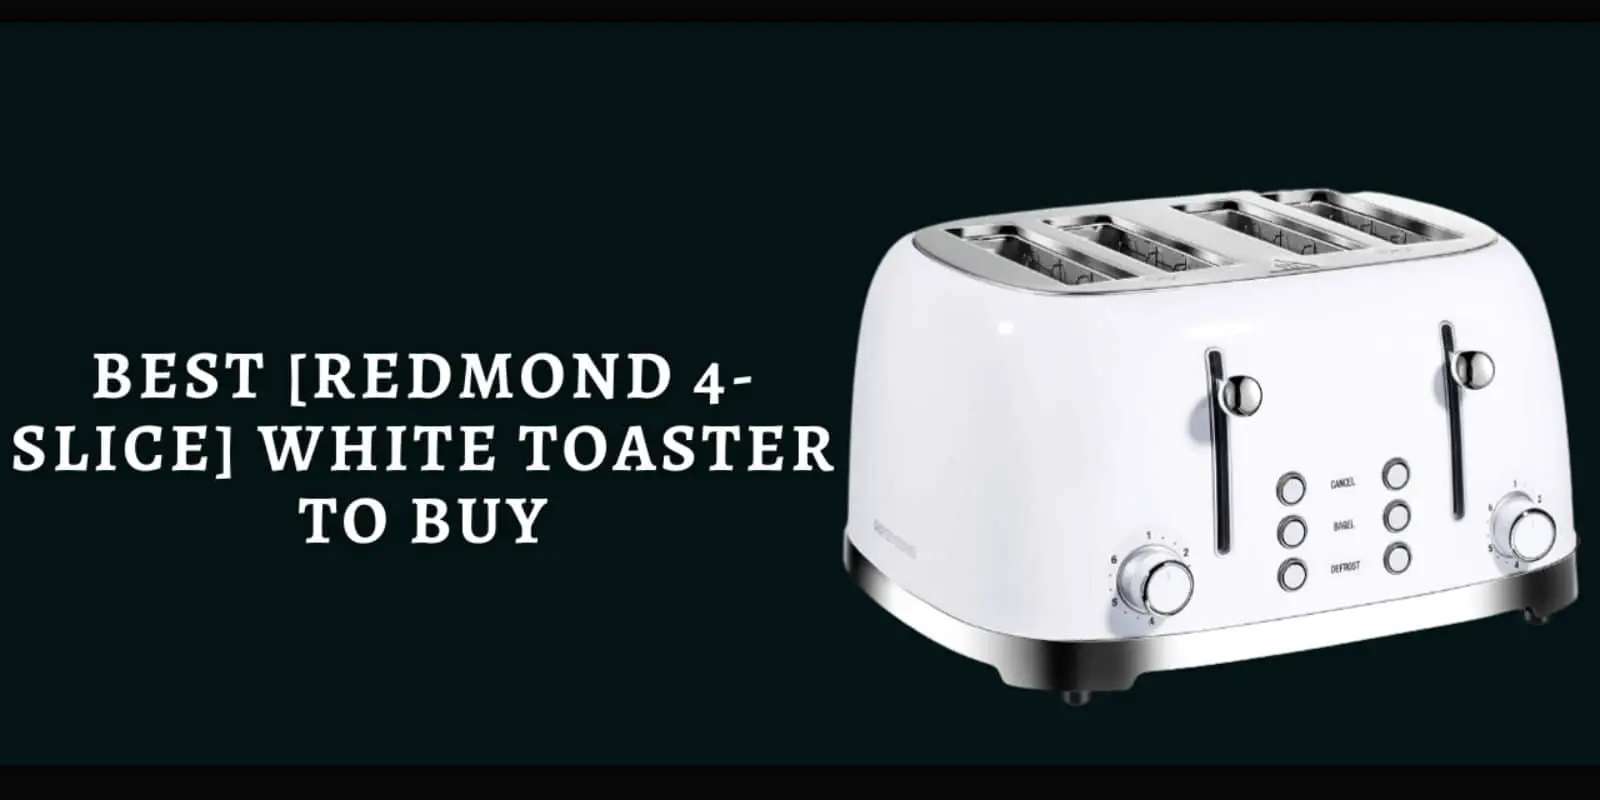 Best [REDMOND 4-Slice] White Toaster to Buy | Specification, Benefits, Pros & Cons